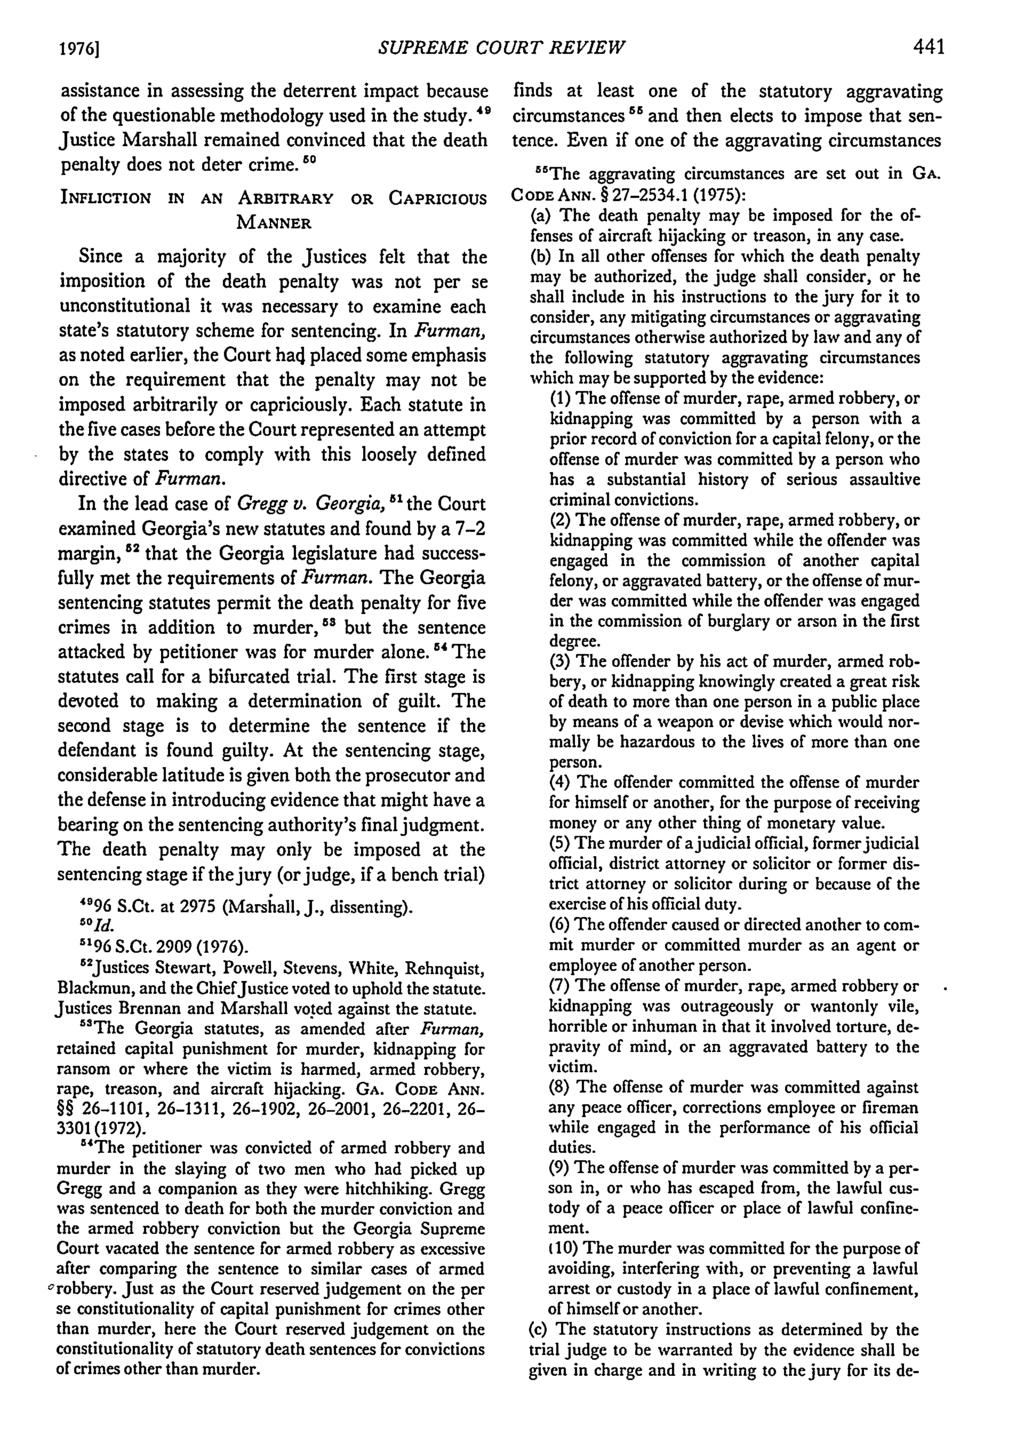 19761 SUPREME COURT REVIEW assistance in assessing the deterrent impact because of the questionable methodology used in the study.